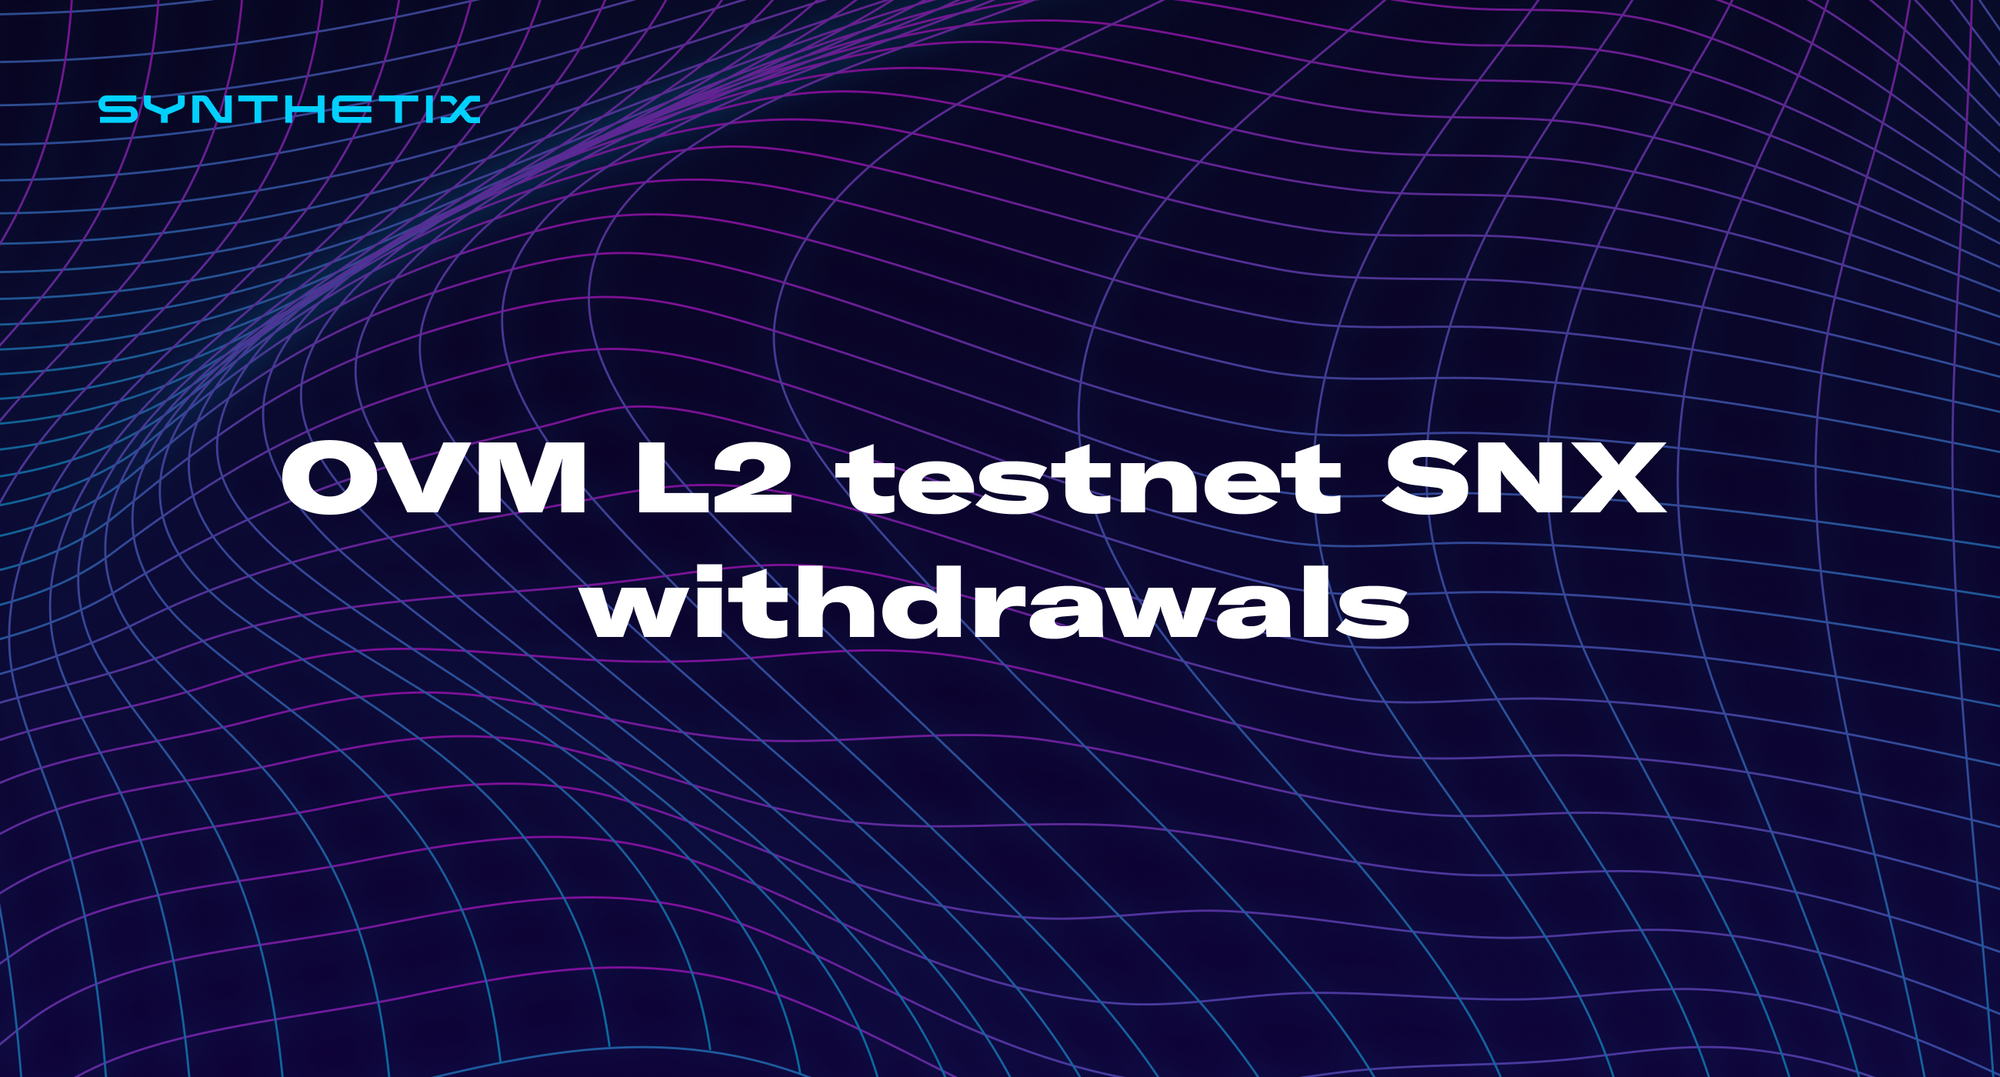 L2 SNX is now available for withdrawal from the Optimistic Ethereum testnet